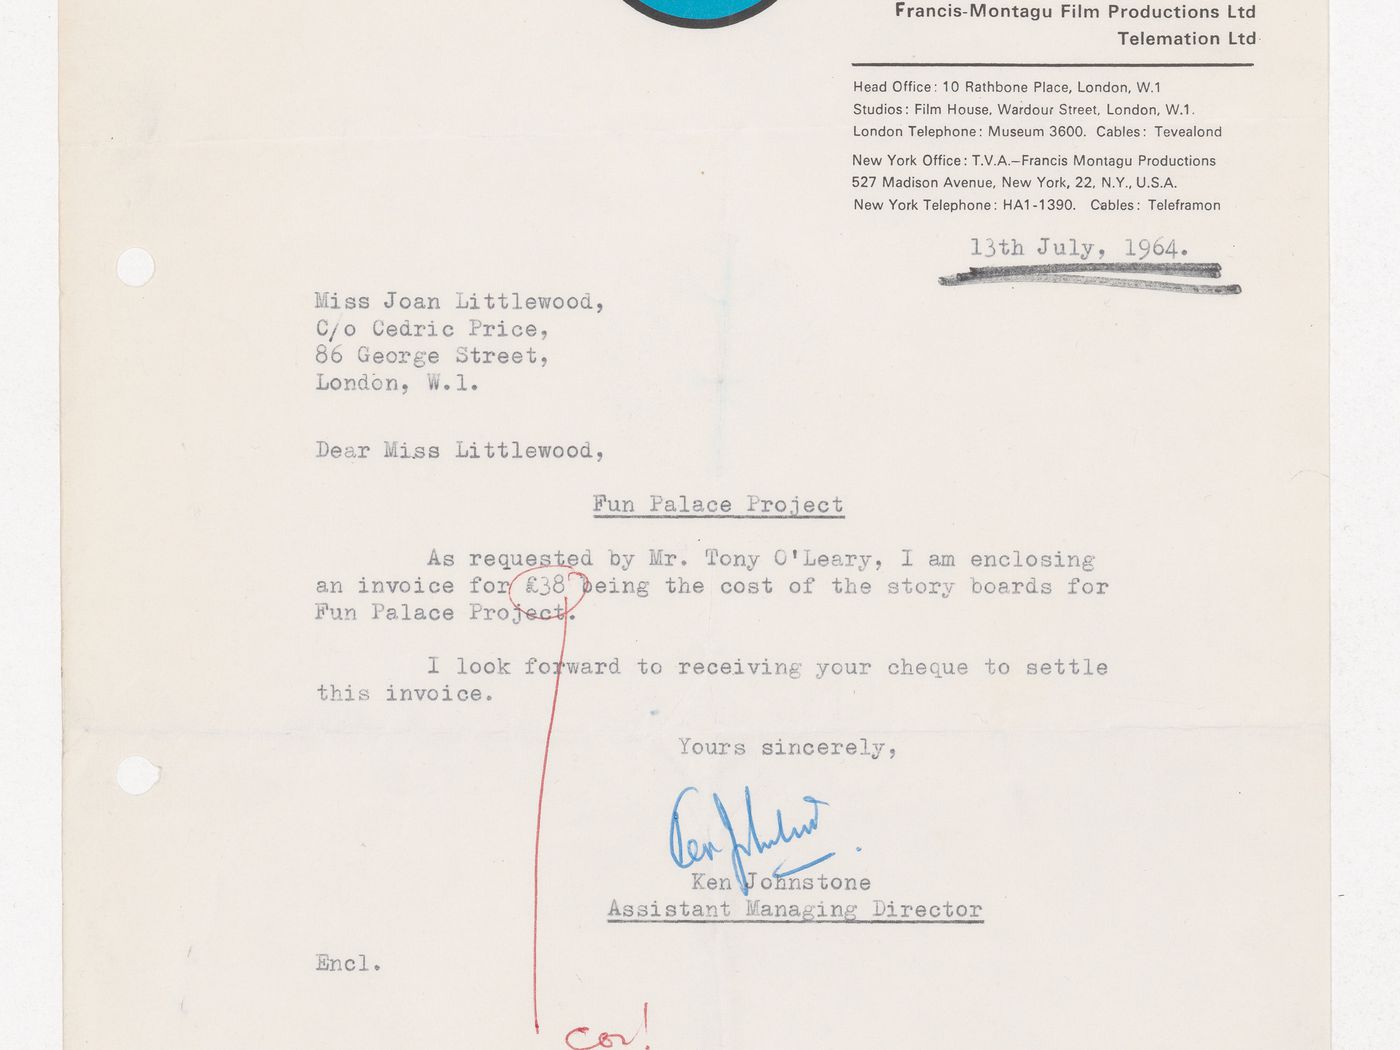 Letter from Ken Johnstone of The TVA Group of Companies to Joan Littlewood regarding payment for storyboards for Fun Palace Project film